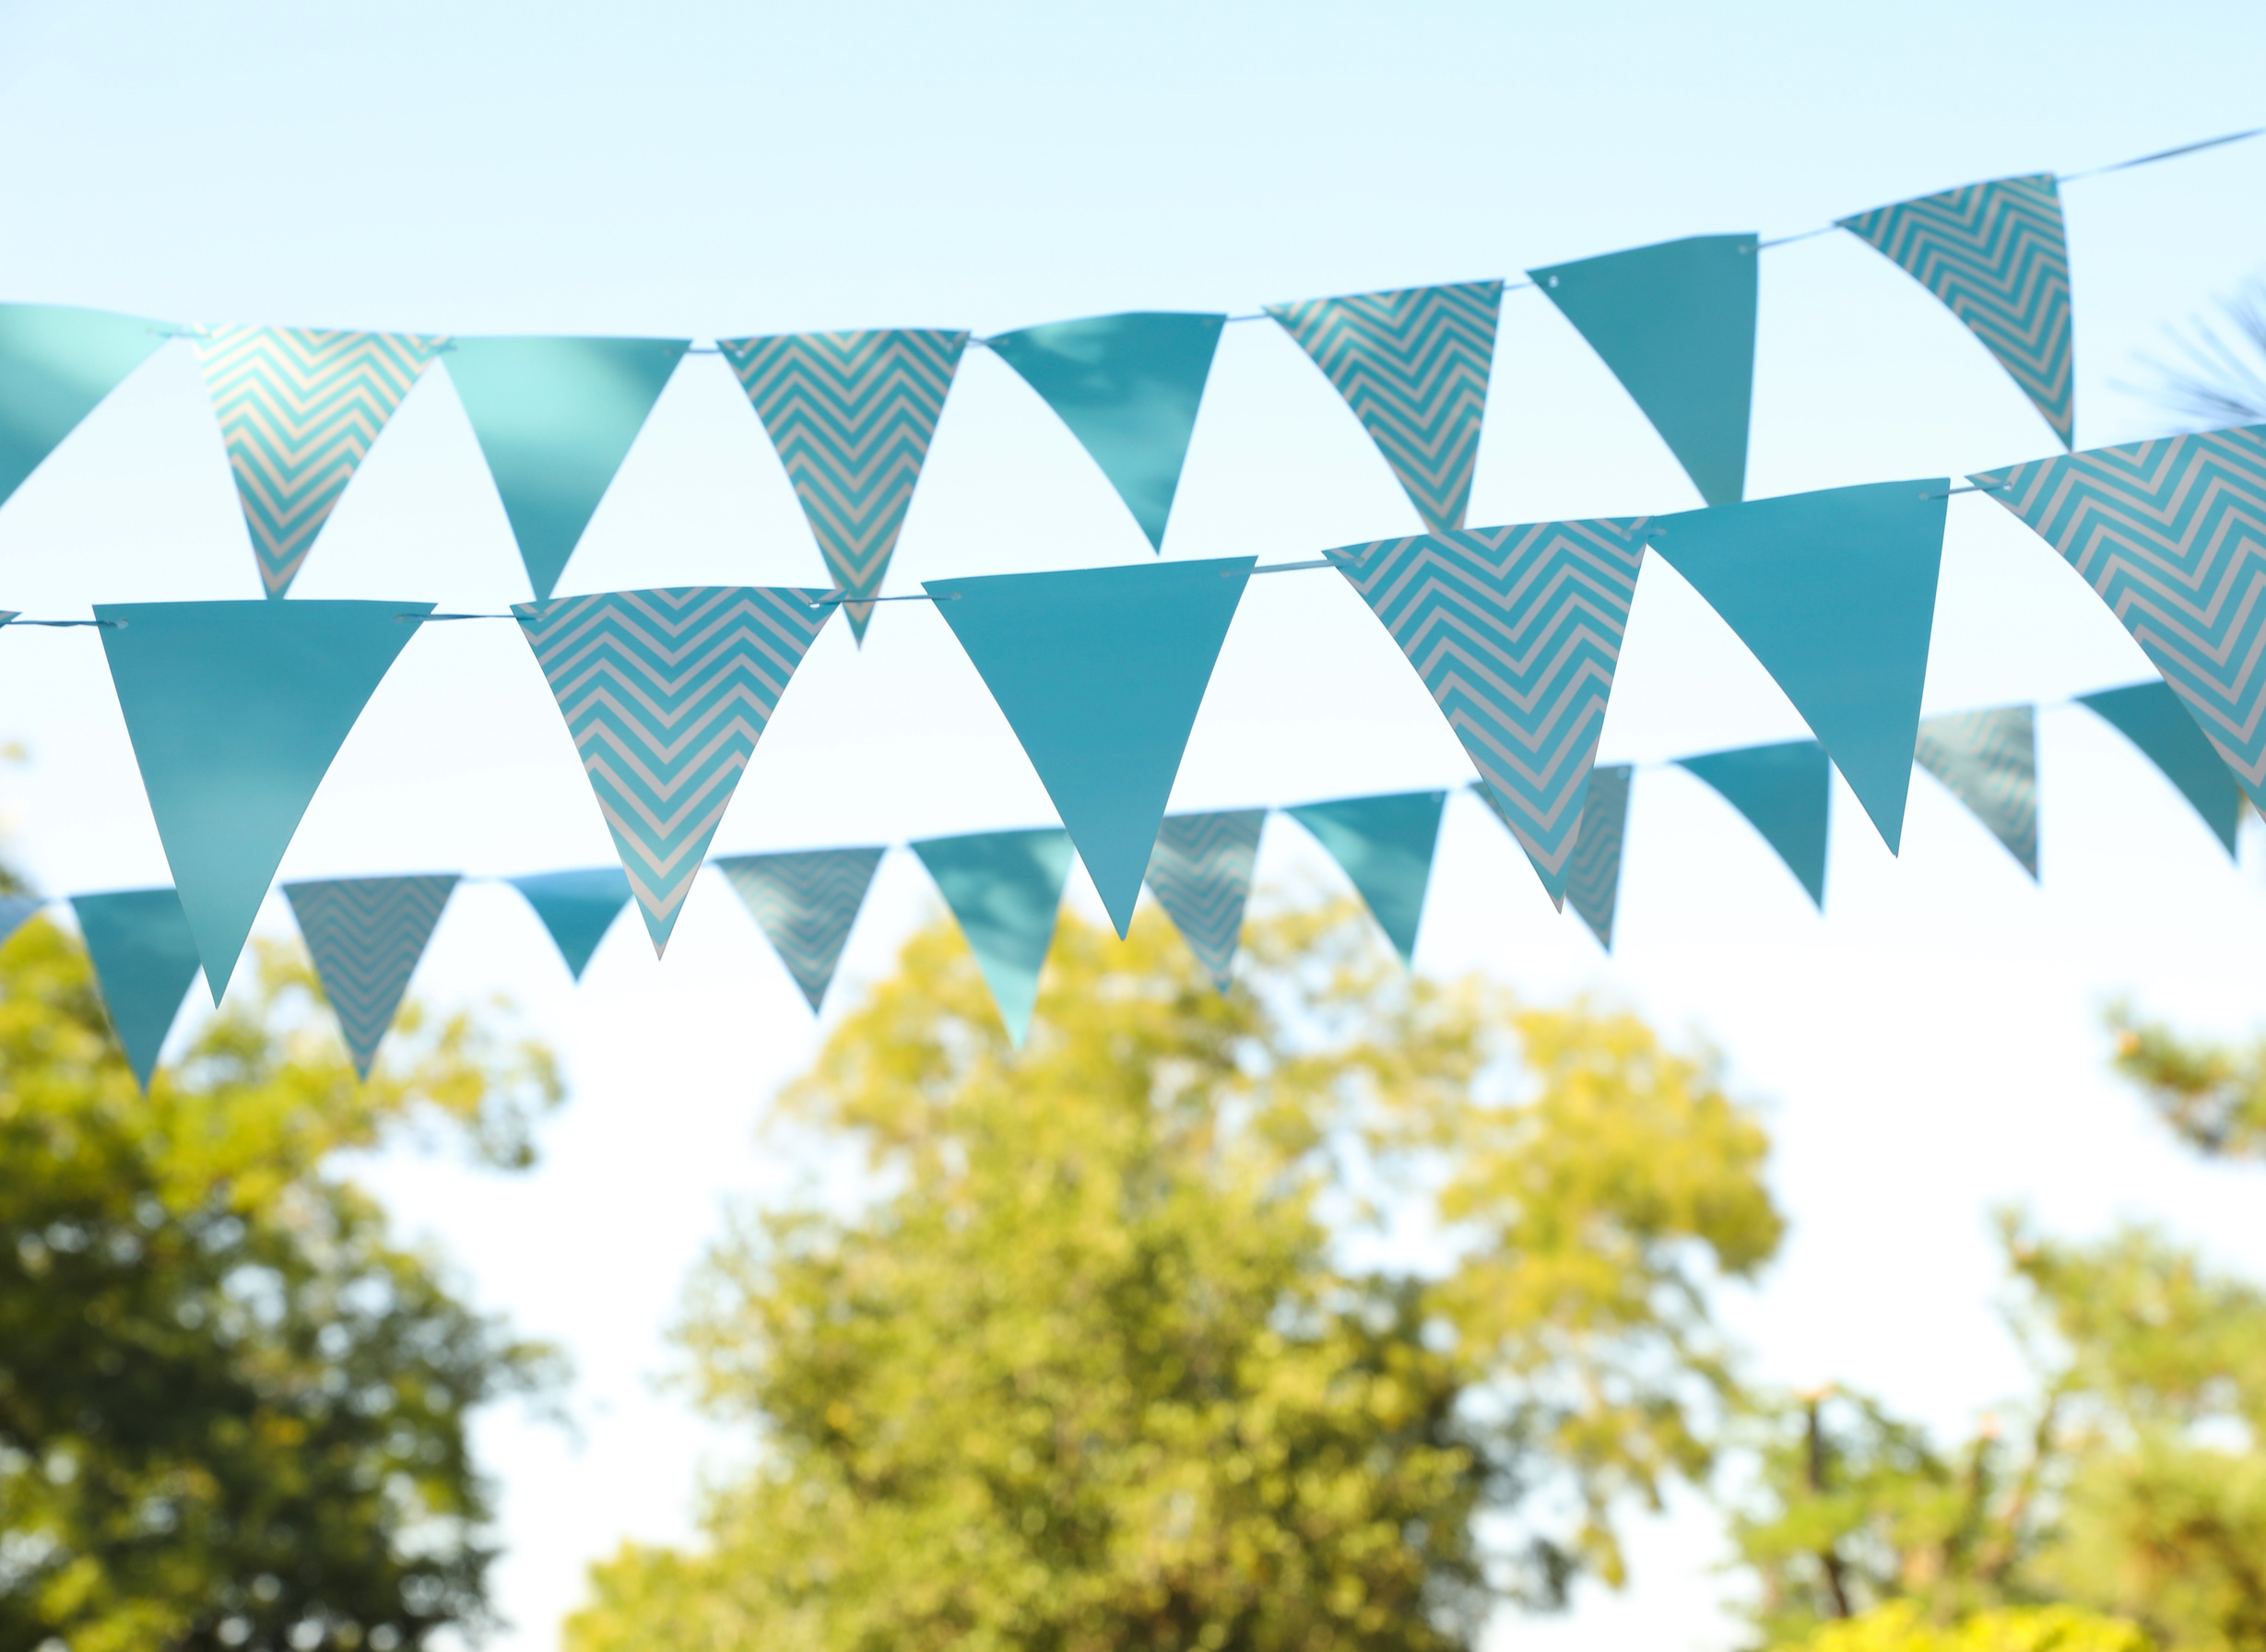 Light Blue Bunting Flags in Park. Party Decor